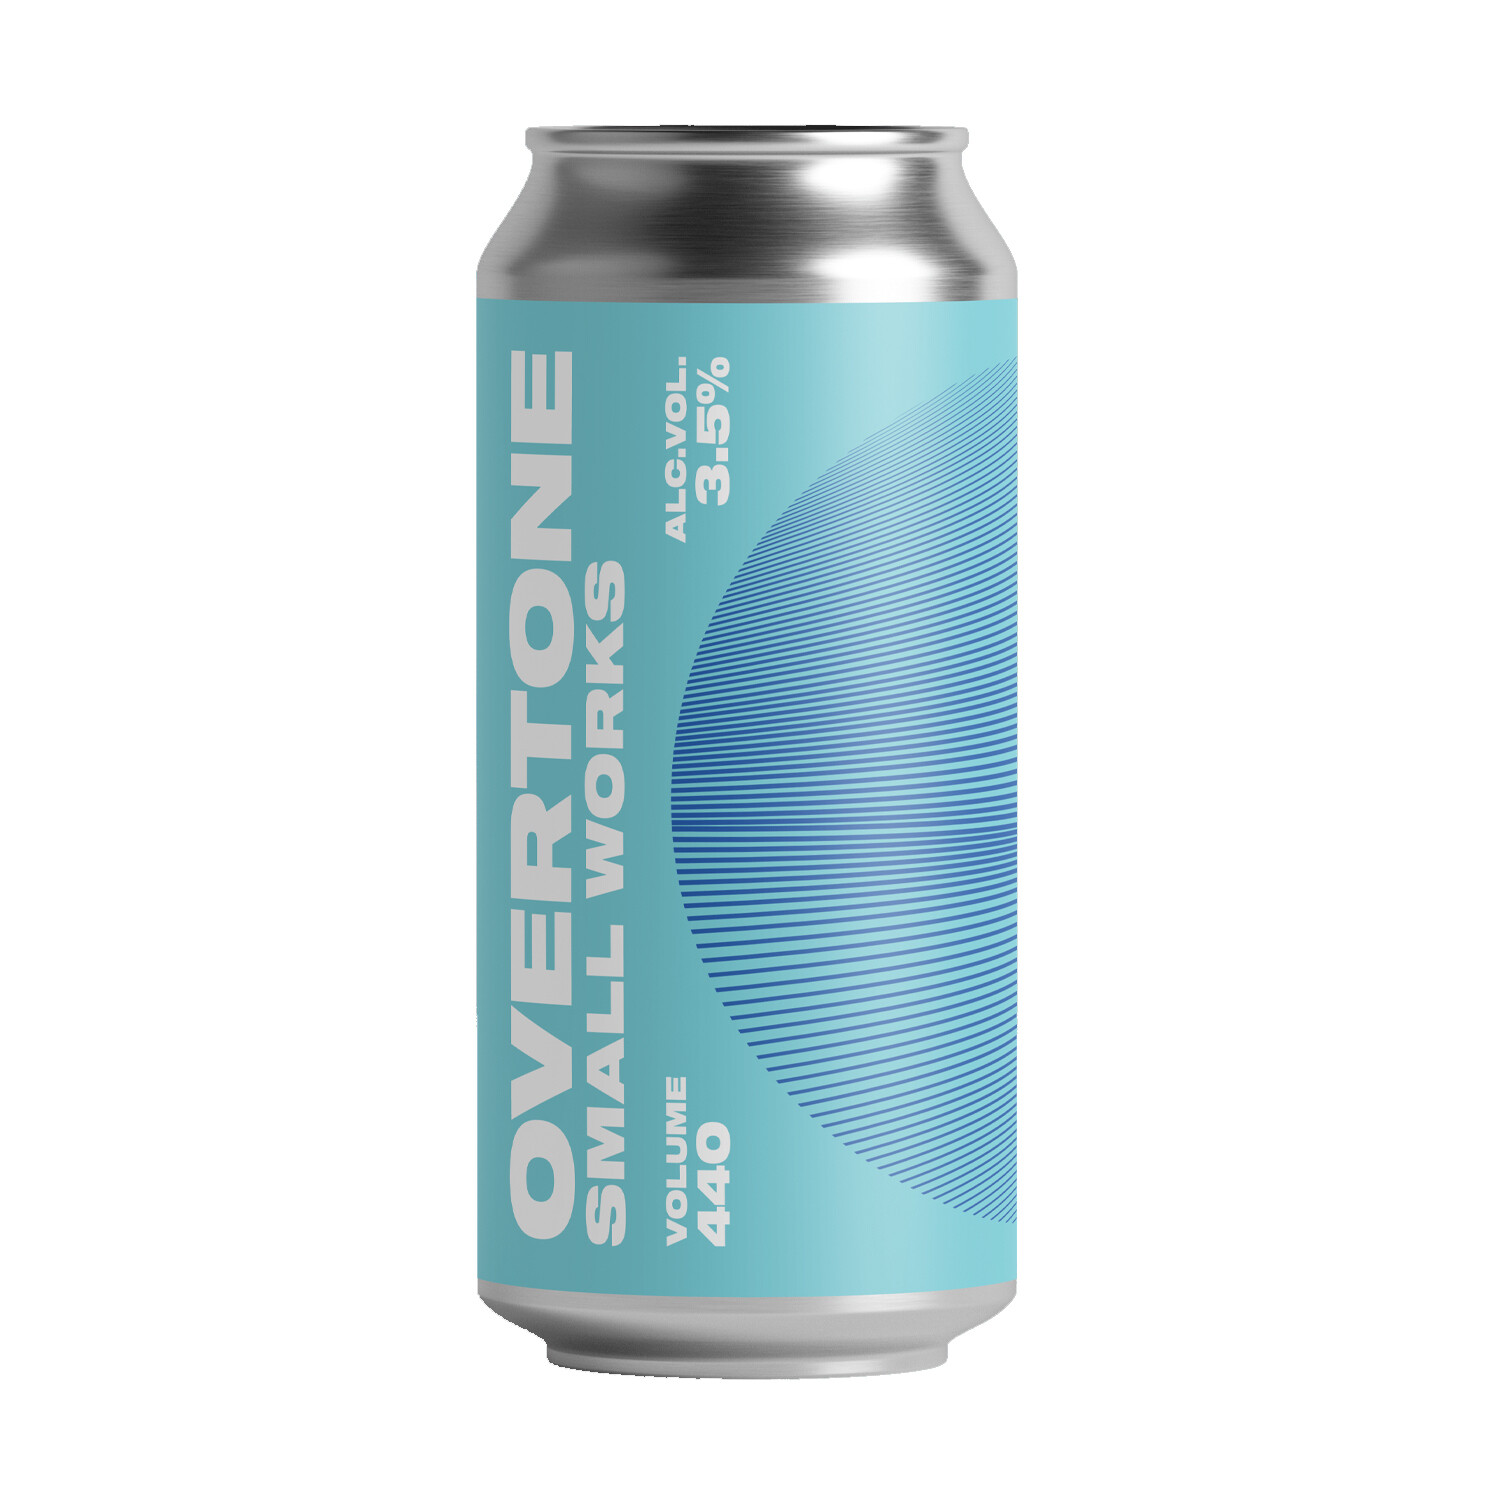 Overtone Small Works Small Pale Ale